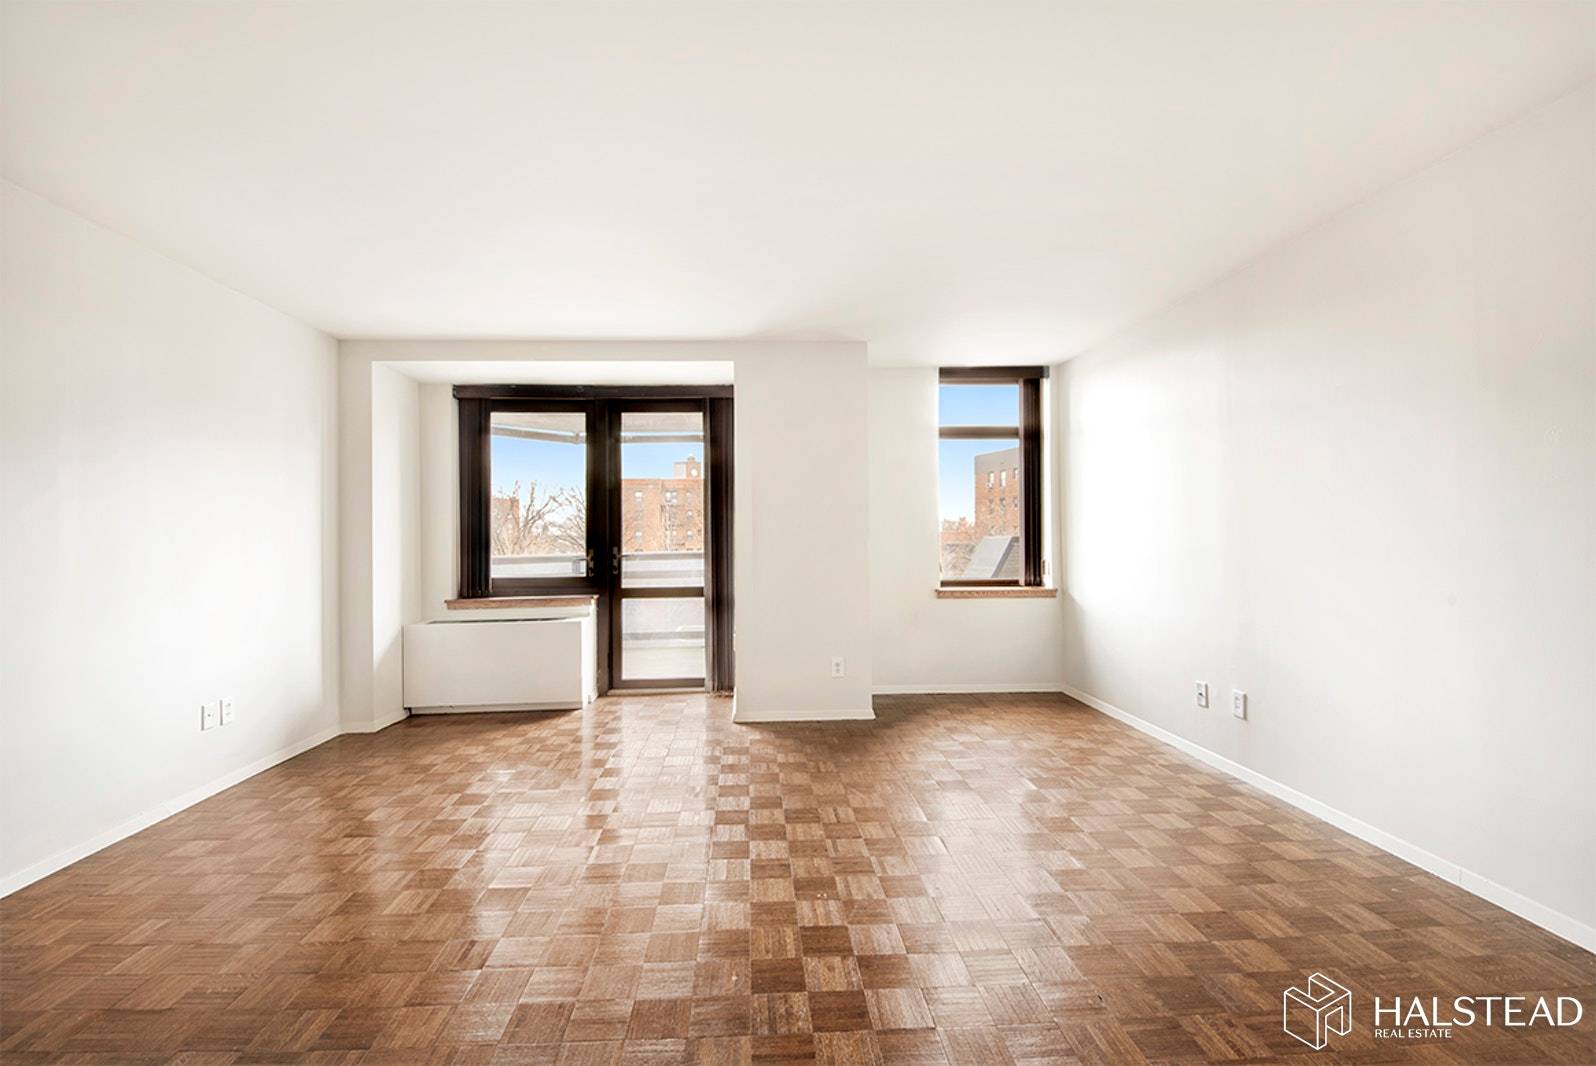 This Lovely Spacious One Bedroom Apartment see Floorplan in excellent condition throughout, This apartment has hardwood floors and has a generously sized balcony overlooking the Pinnacle Gardens and a washer ...